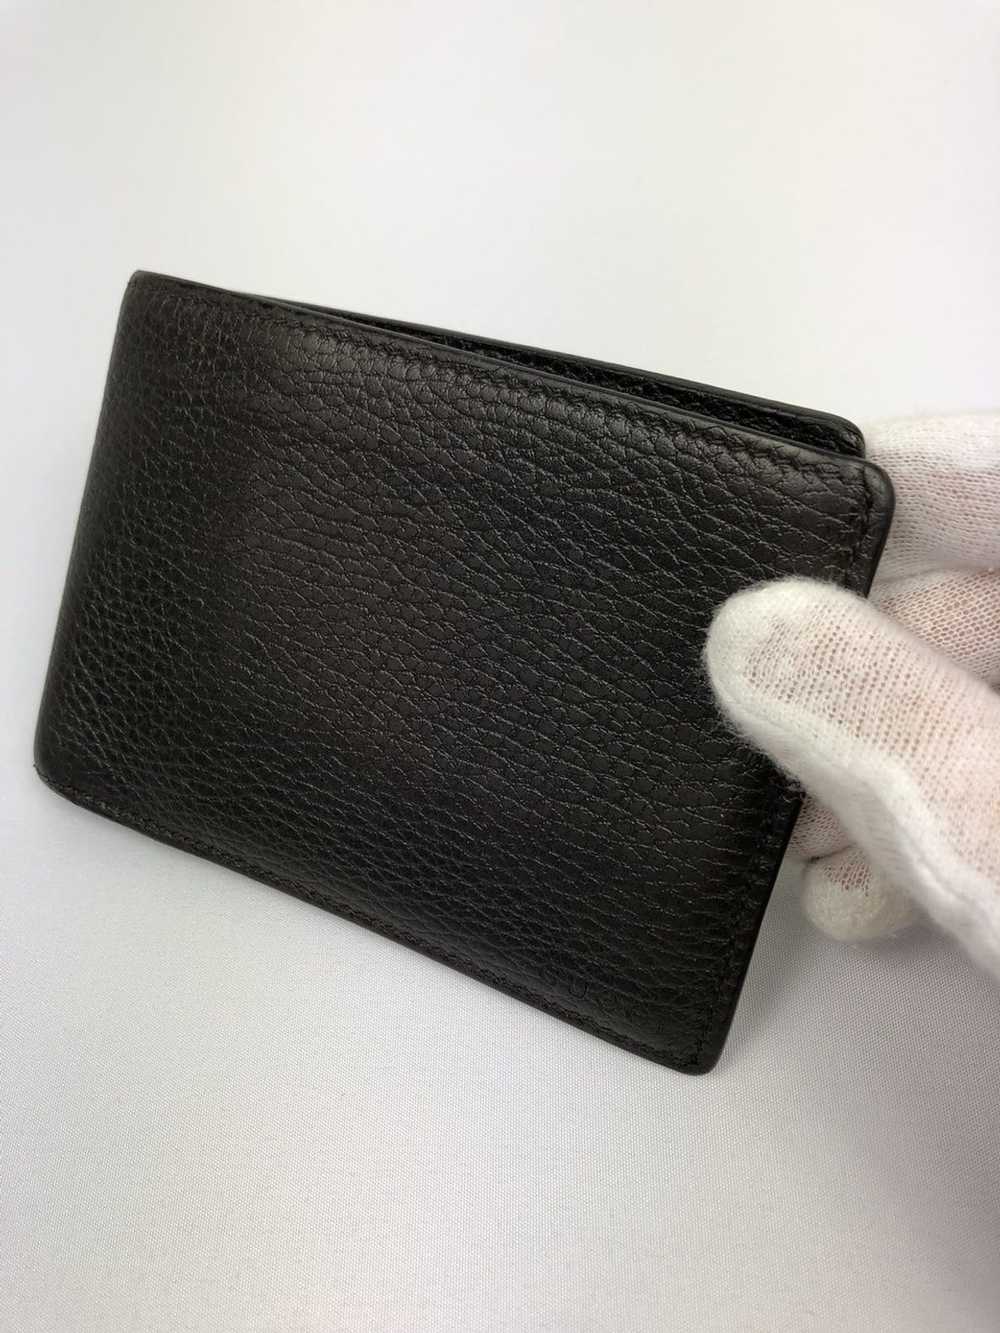 Gucci Gucci brown leather bifold wallet - image 1